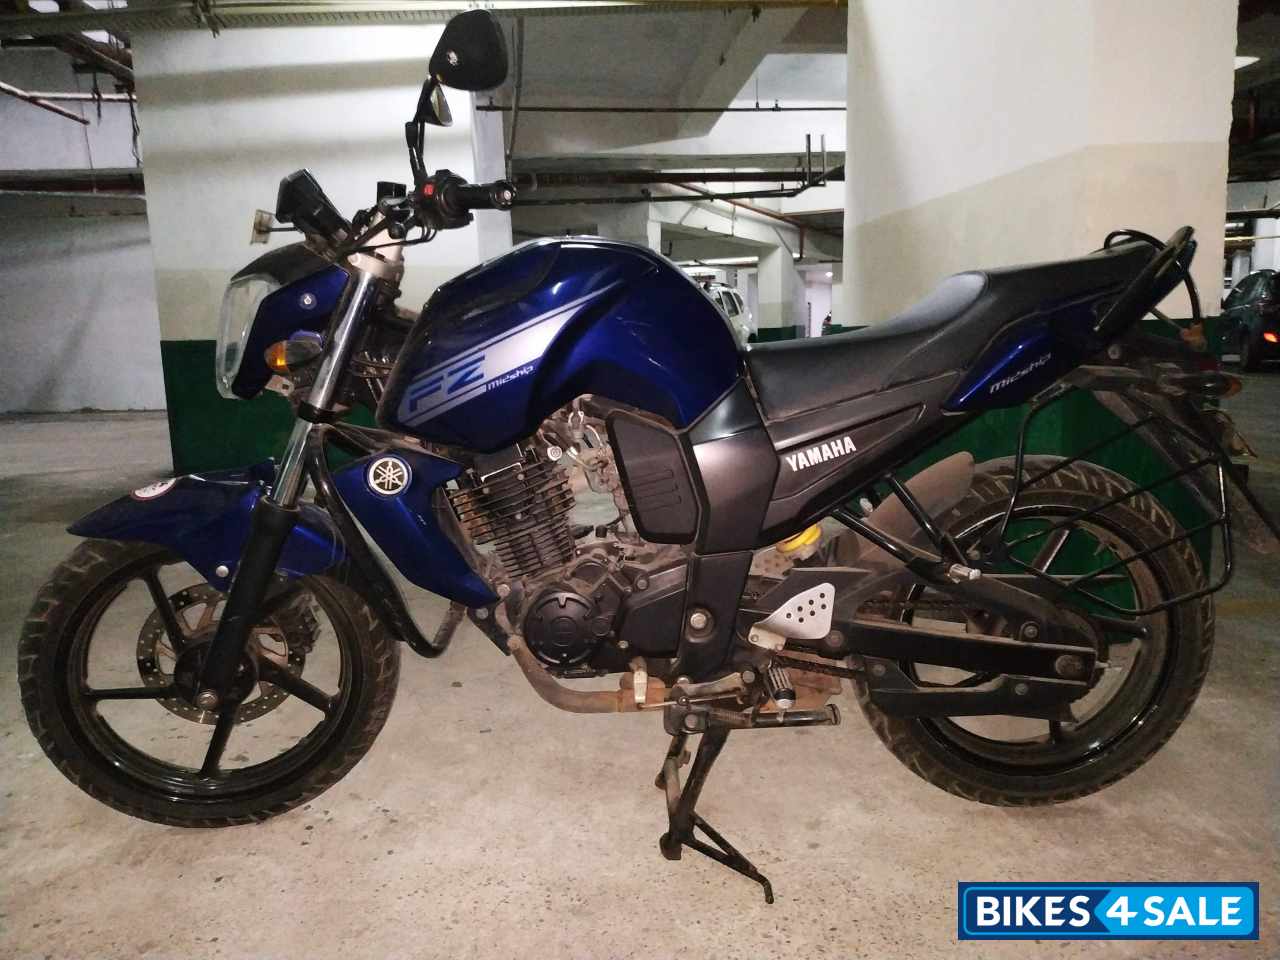 Used 2013 model Yamaha FZ16 for sale in Noida. ID 219152. Blue colour ...